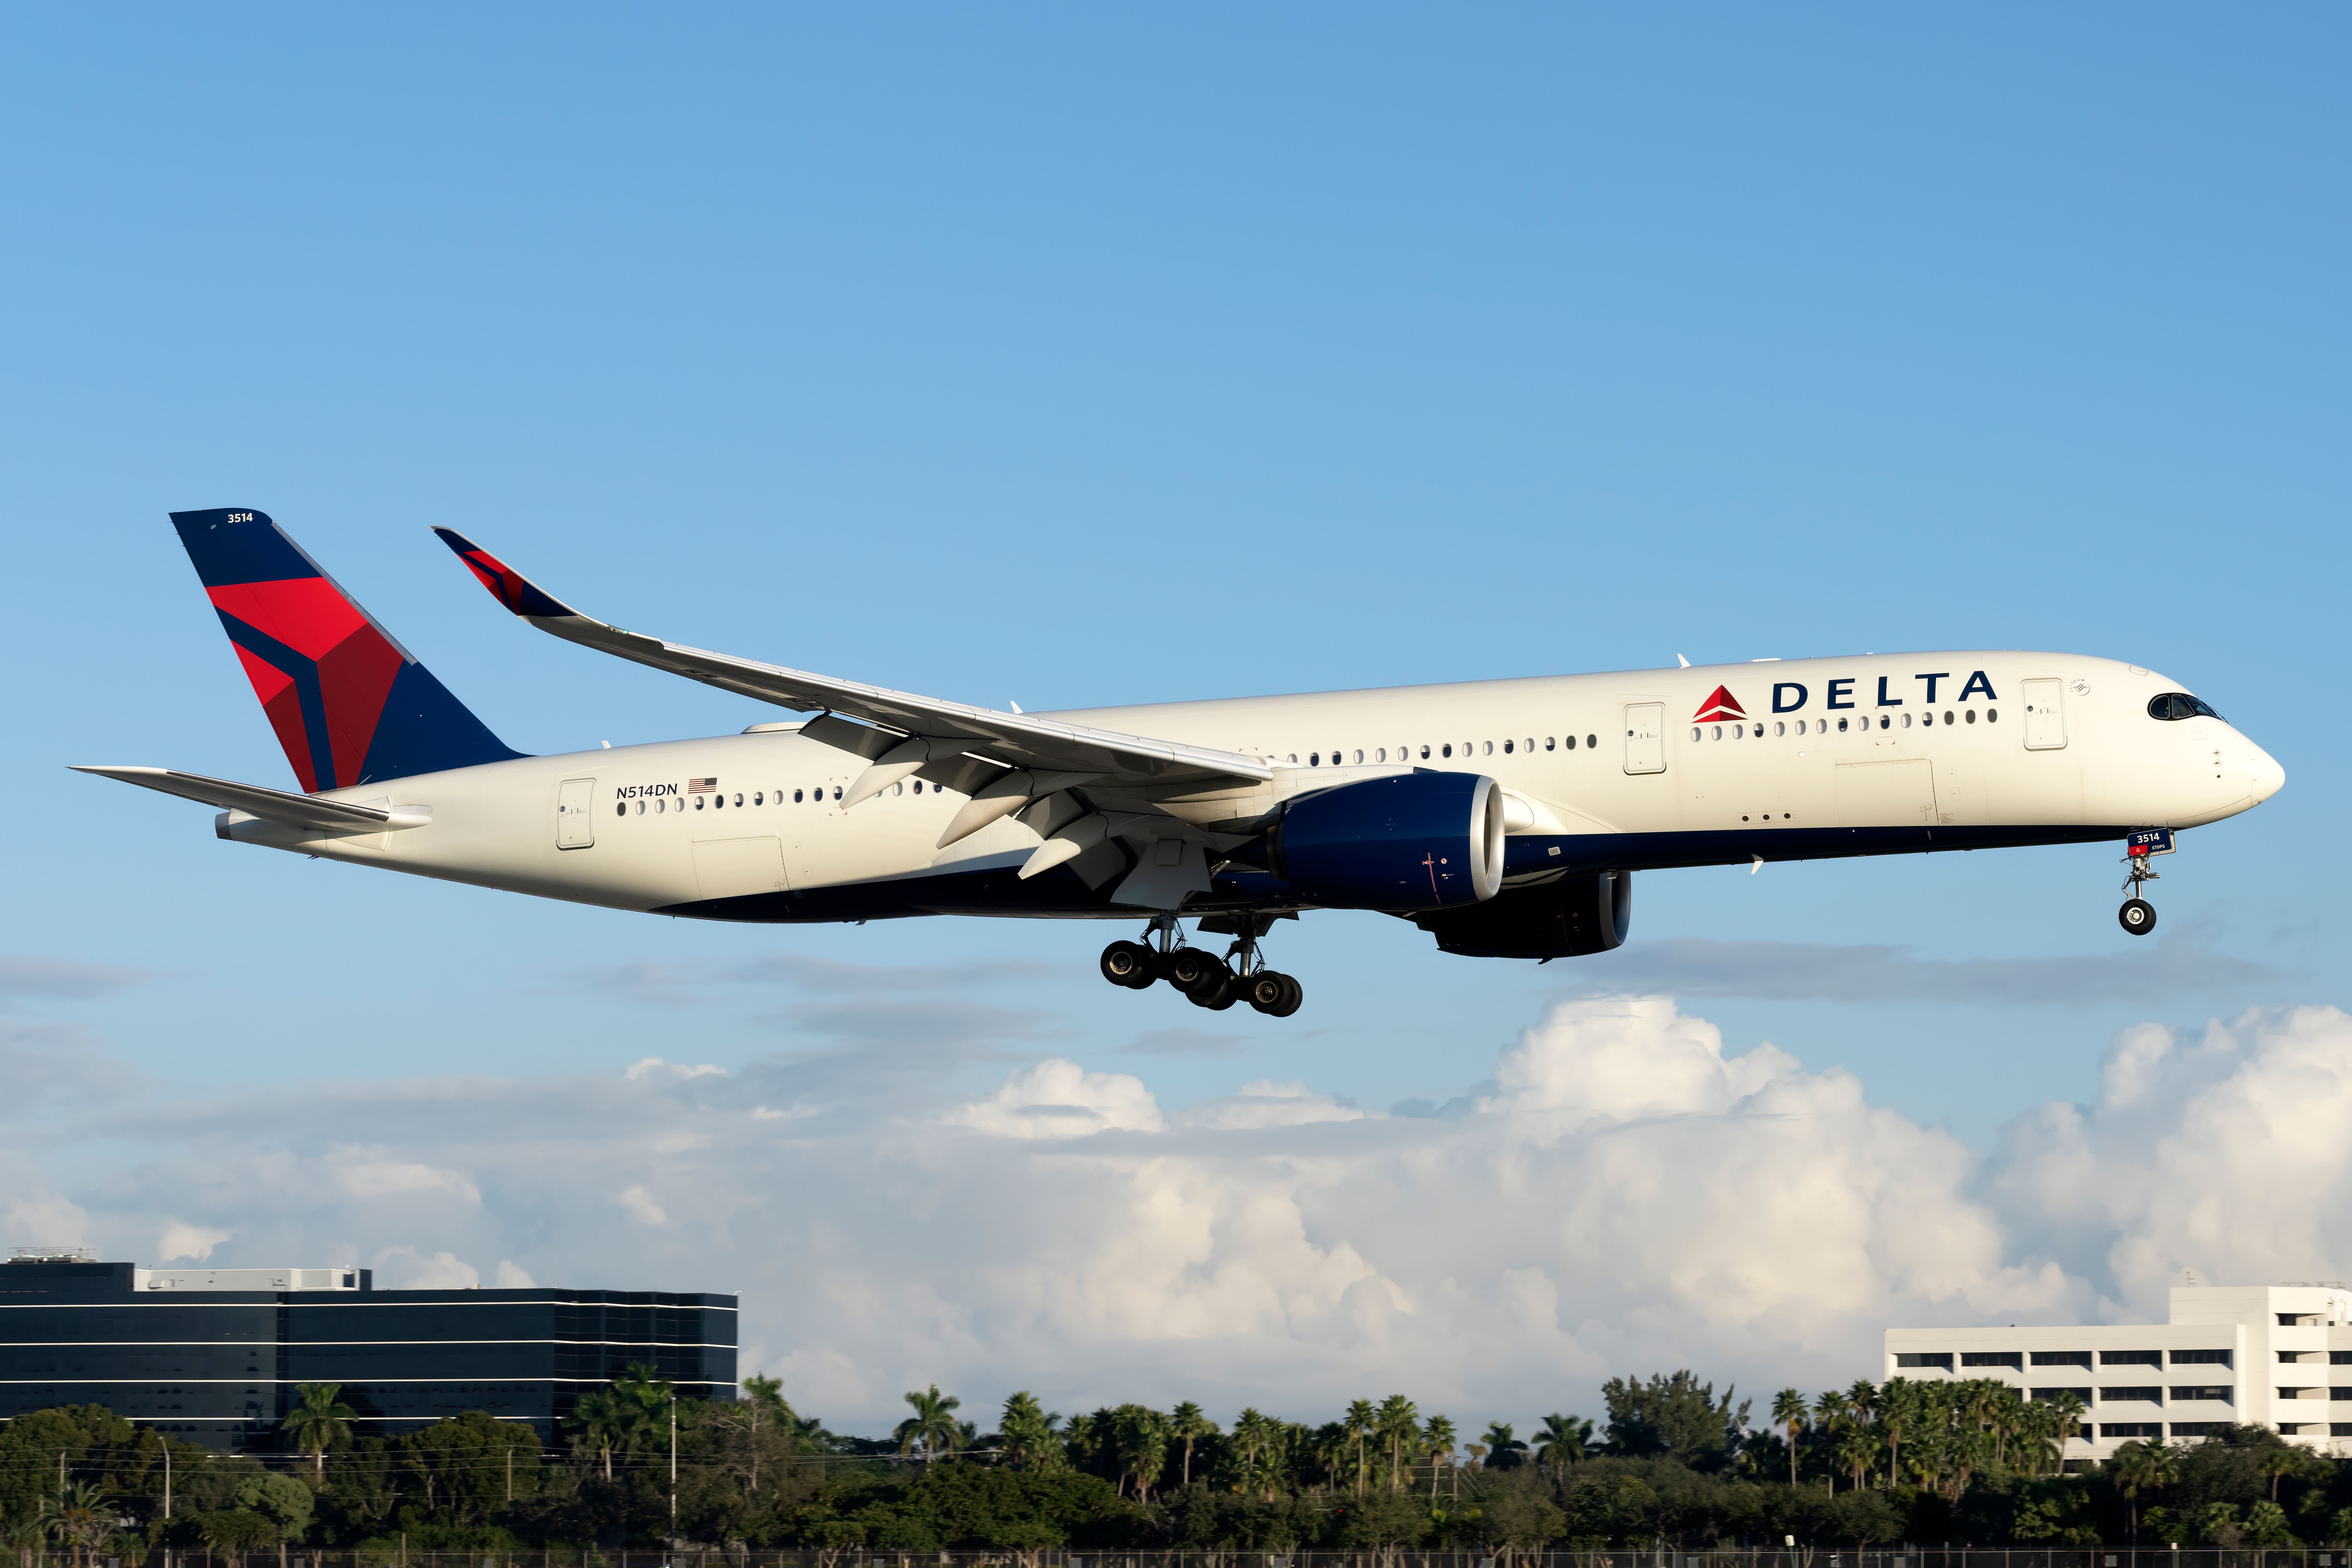 Delta Air Lines Airbus A450-941 on approach